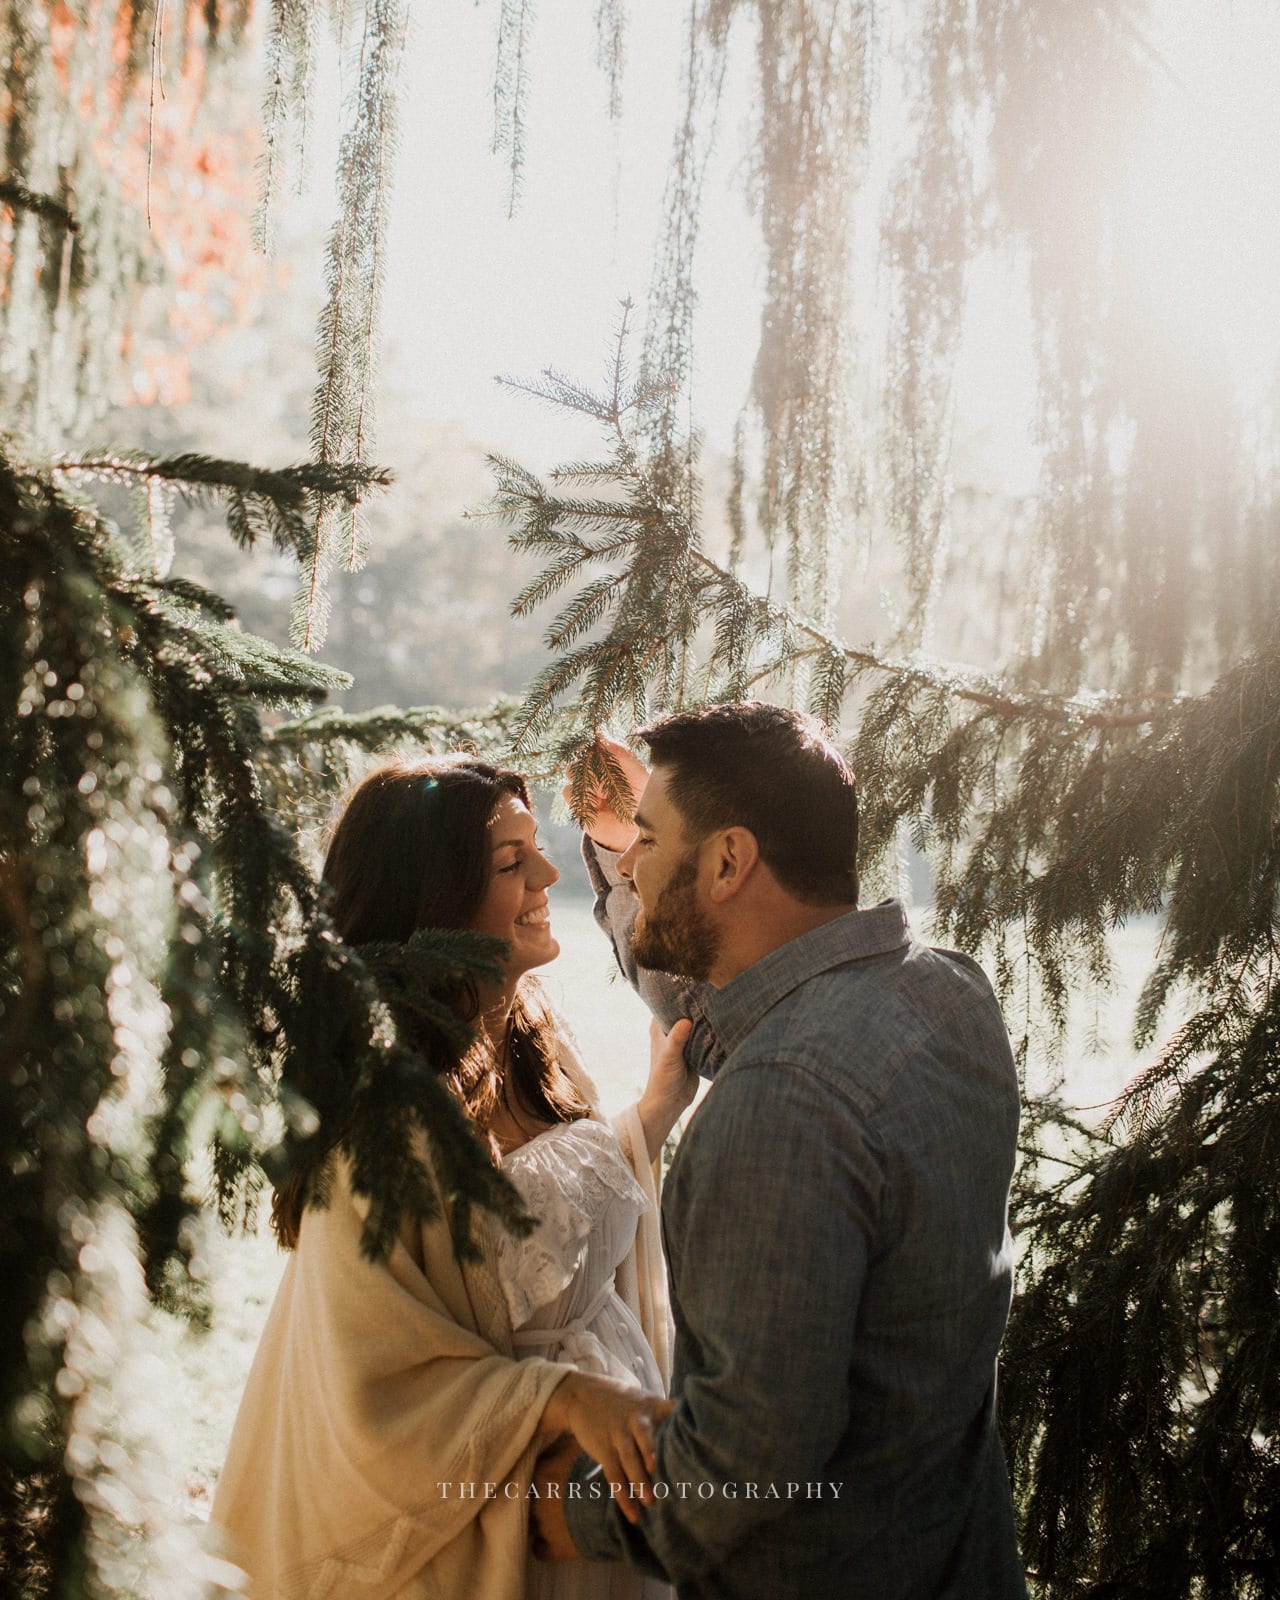 husband and wife laughing in trees - dayton ohio maternity photographer